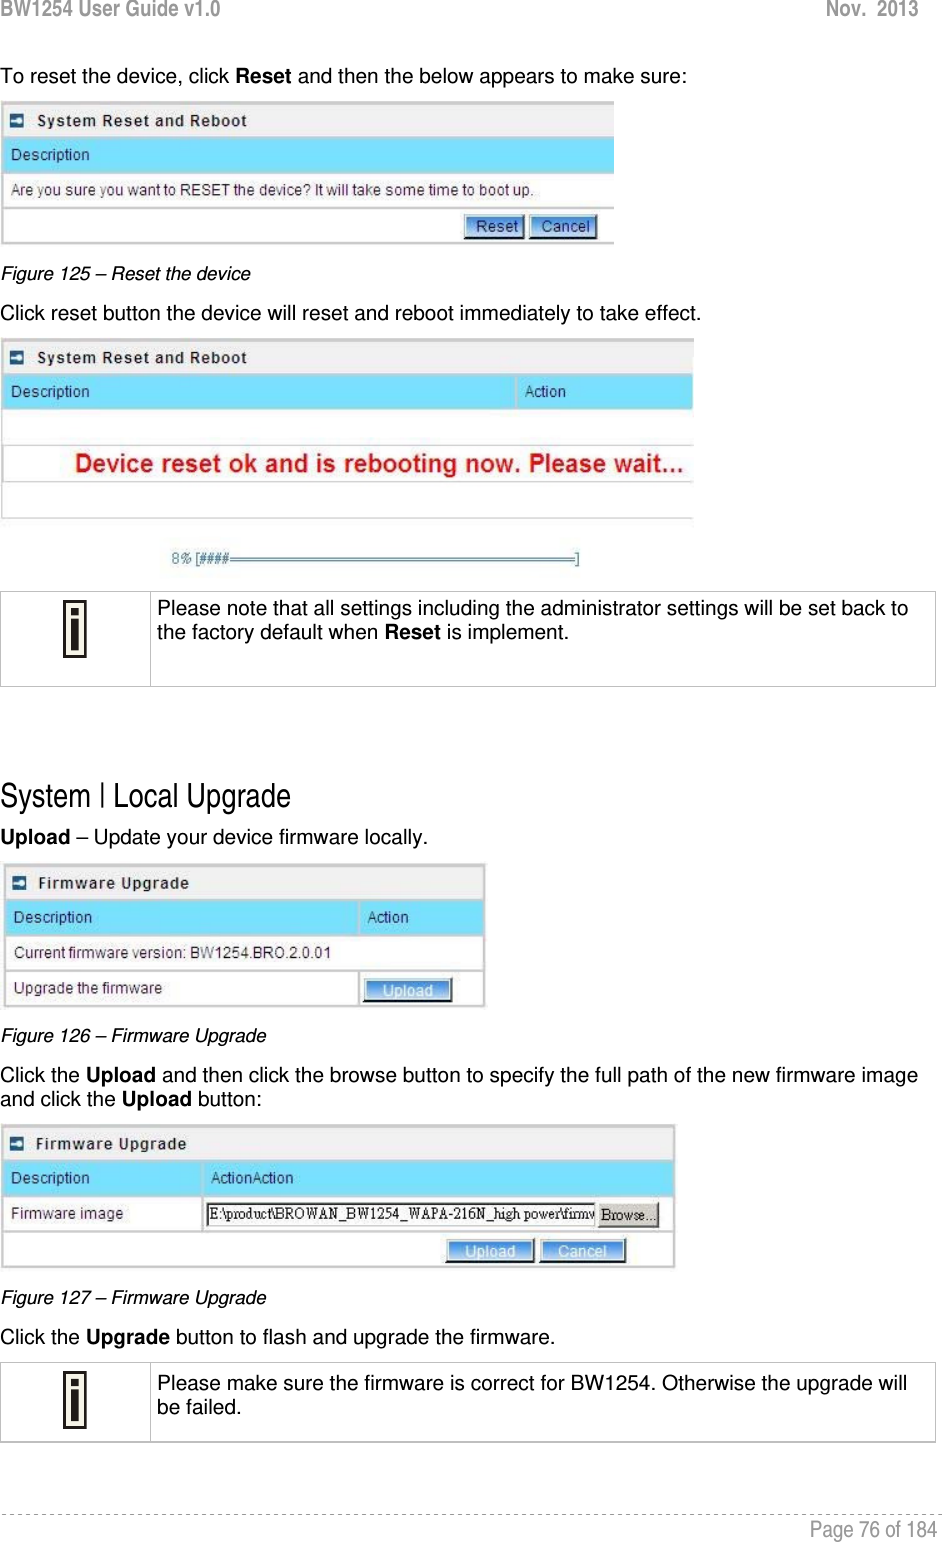 BW1254 User Guide v1.0  Nov.  2013     Page 76 of 184   To reset the device, click Reset and then the below appears to make sure:  Figure 125 – Reset the device Click reset button the device will reset and reboot immediately to take effect.   Please note that all settings including the administrator settings will be set back to the factory default when Reset is implement.   System | Local Upgrade Upload – Update your device firmware locally.  Figure 126 – Firmware Upgrade Click the Upload and then click the browse button to specify the full path of the new firmware image and click the Upload button:  Figure 127 – Firmware Upgrade Click the Upgrade button to flash and upgrade the firmware.  Please make sure the firmware is correct for BW1254. Otherwise the upgrade will be failed.  